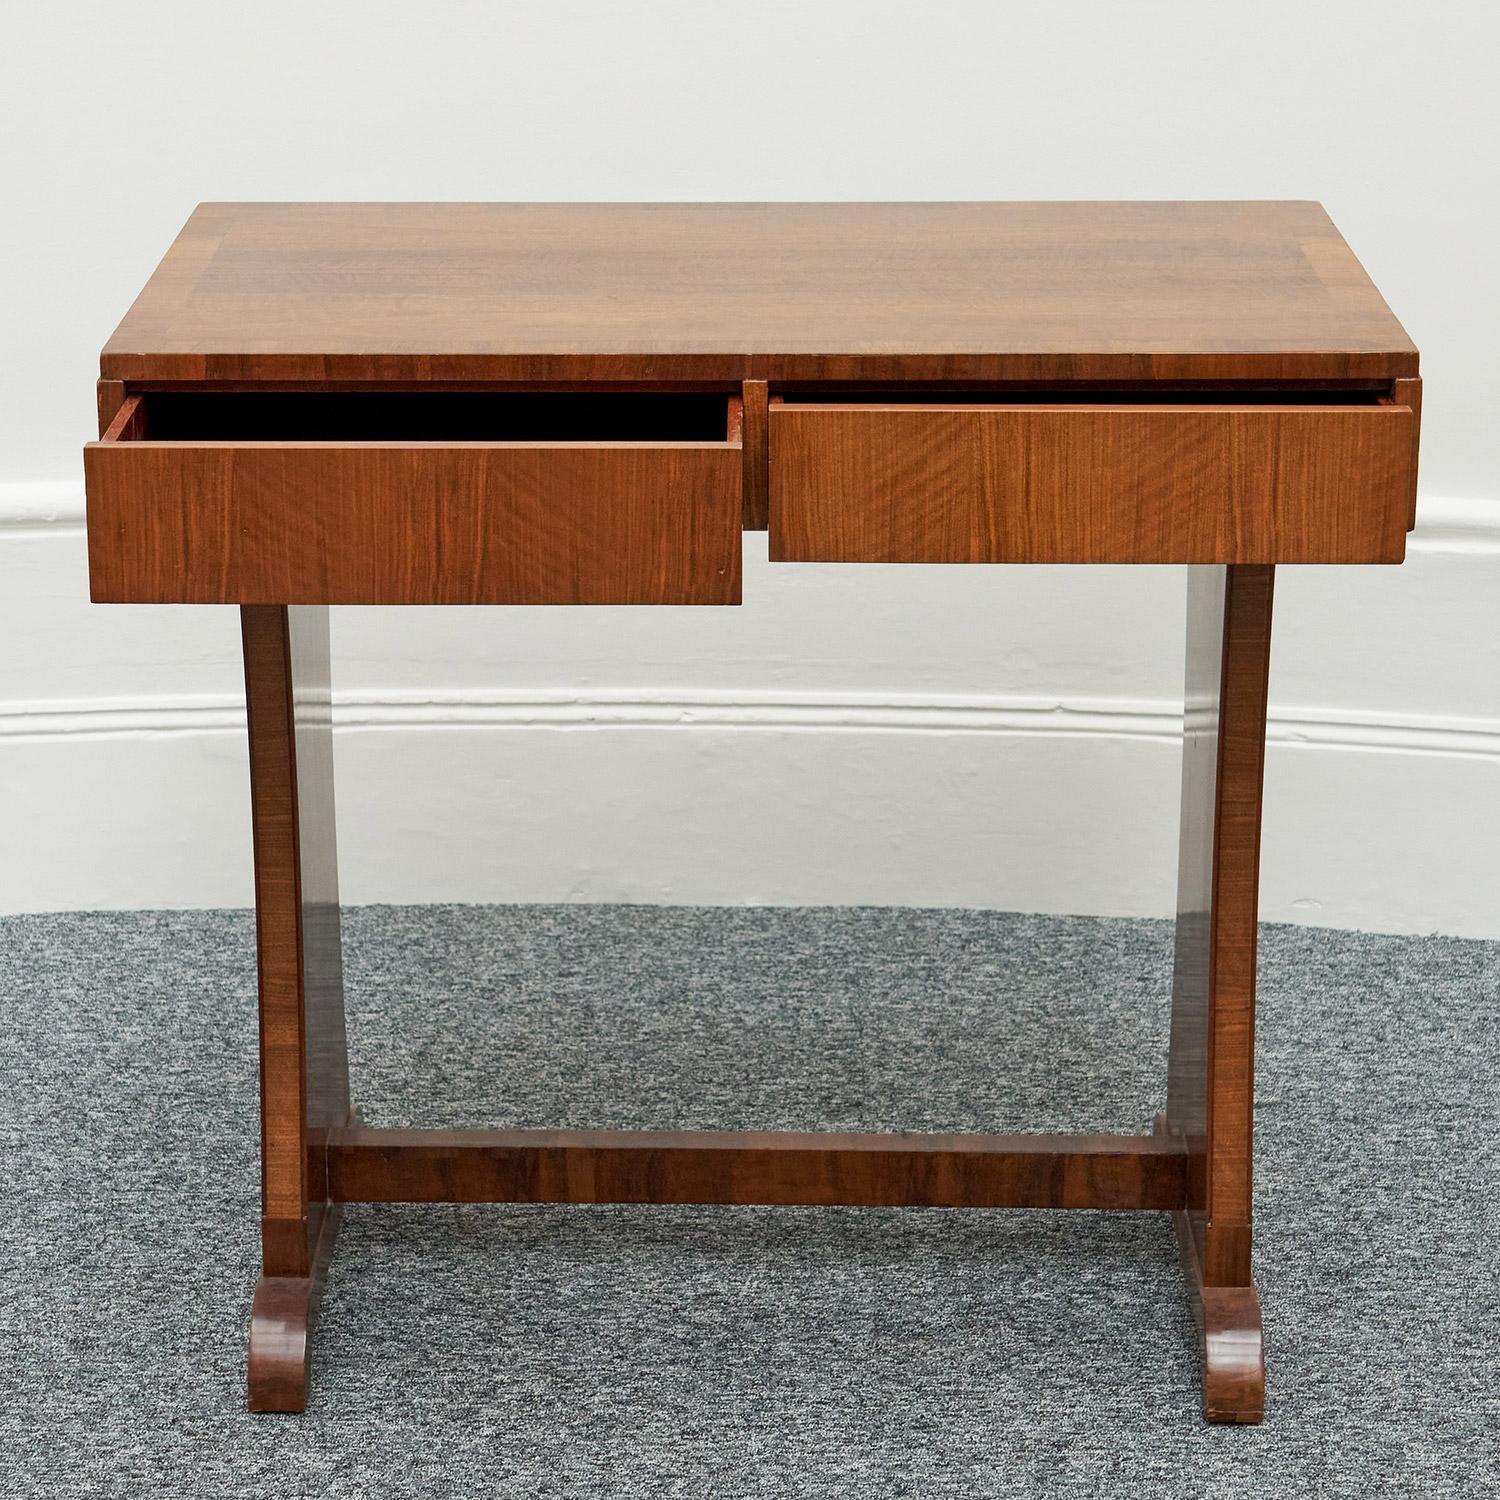 English Art Deco Writing Table or Console Table by Waring & Gillow, 1932